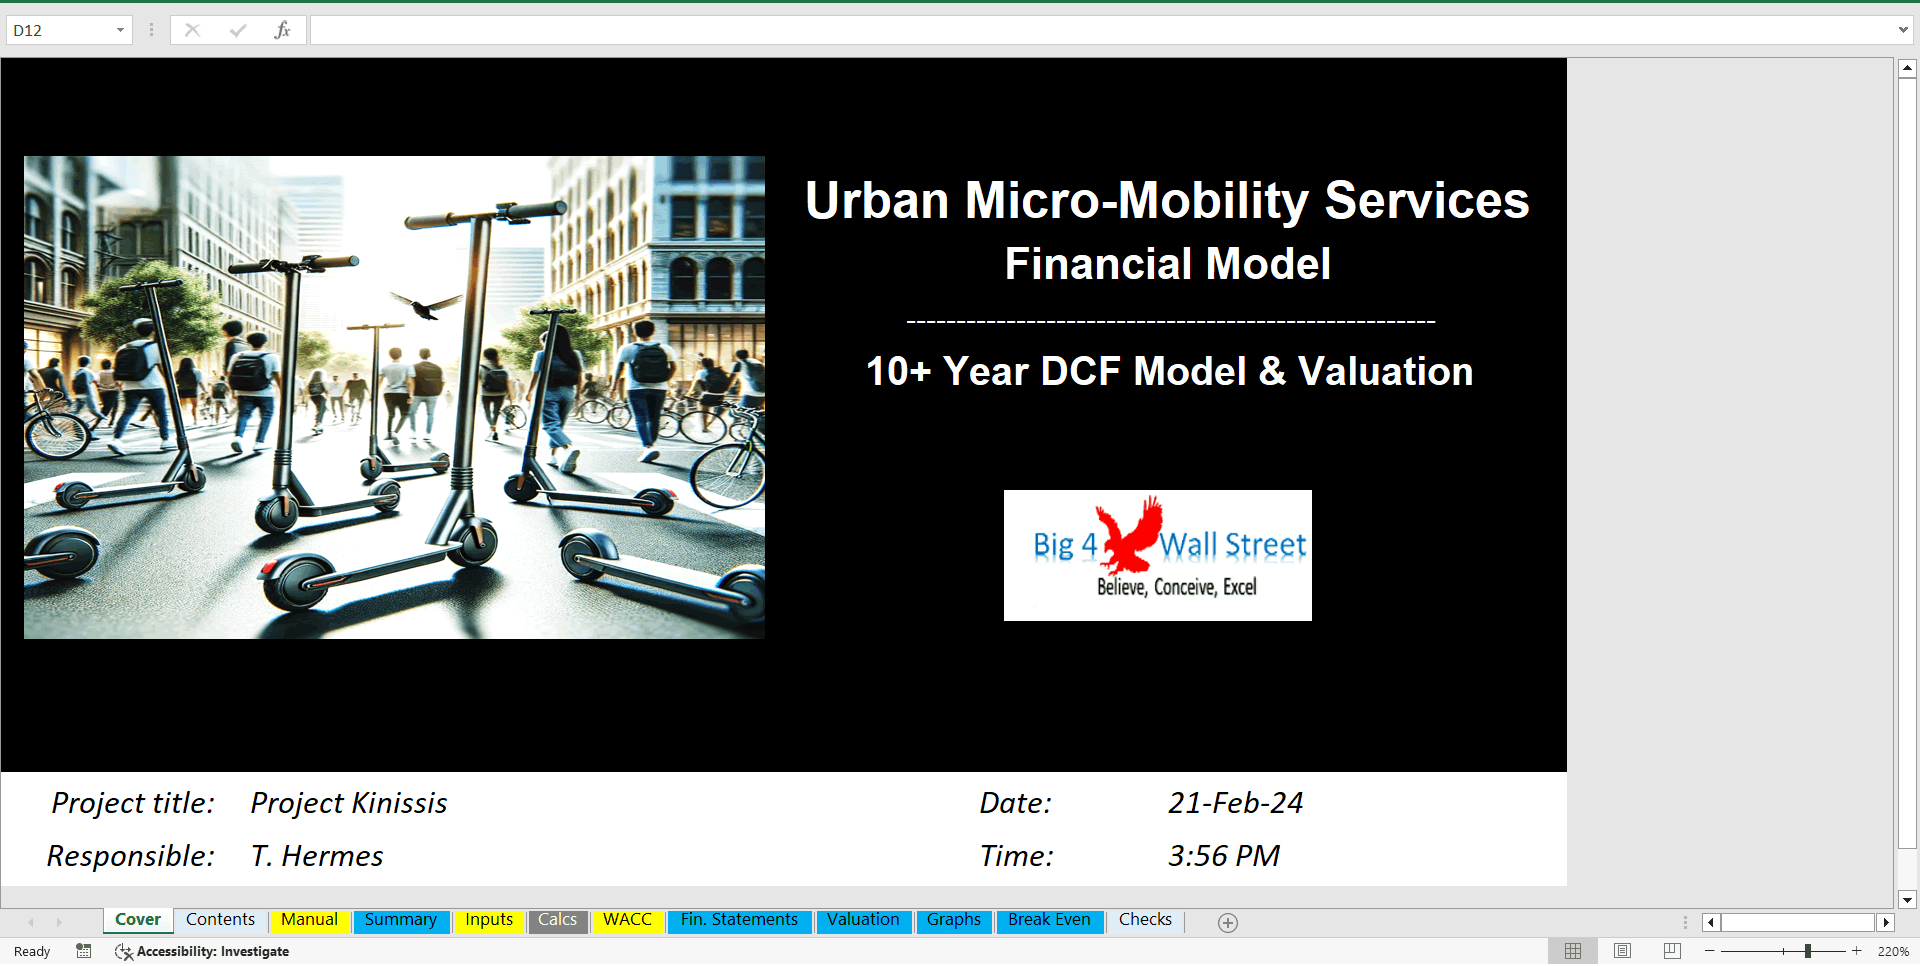 Urban Micro-Mobility Services Financial Model (DCF & Valuation)